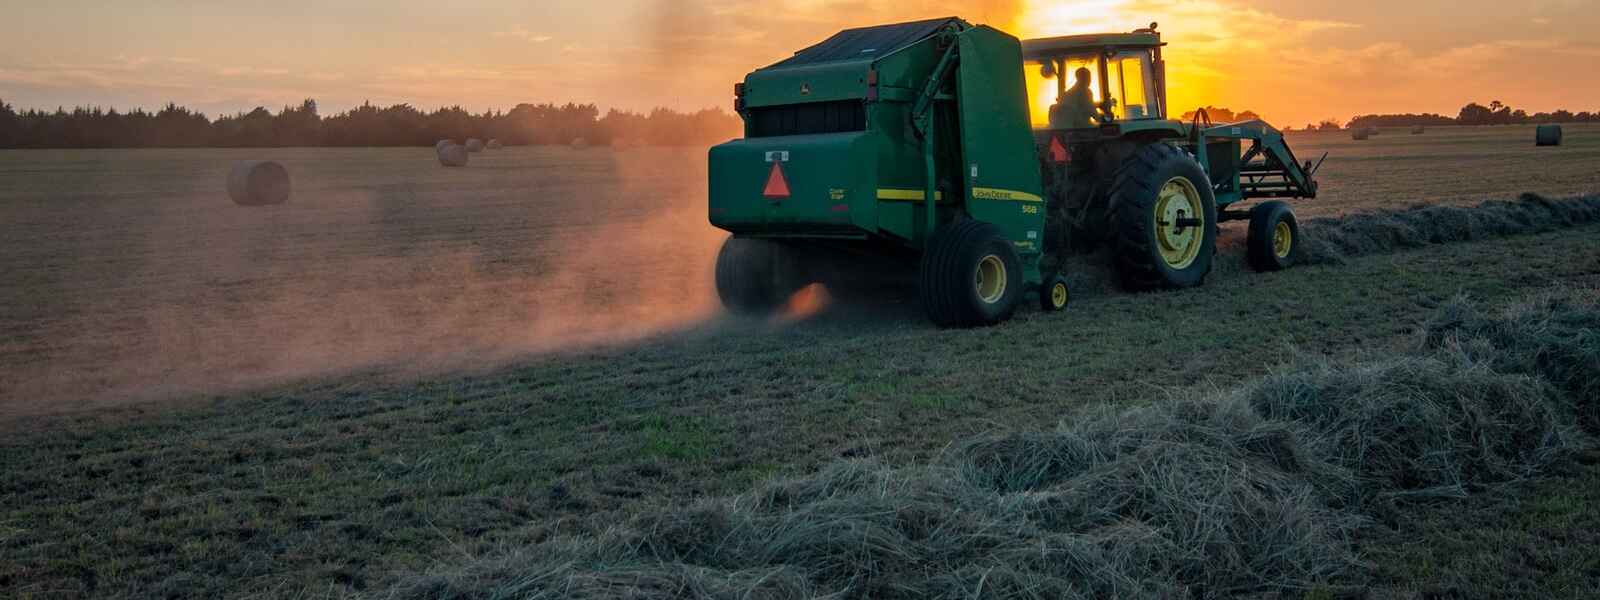 Farm equipmentstirs up dust on a field during sunset